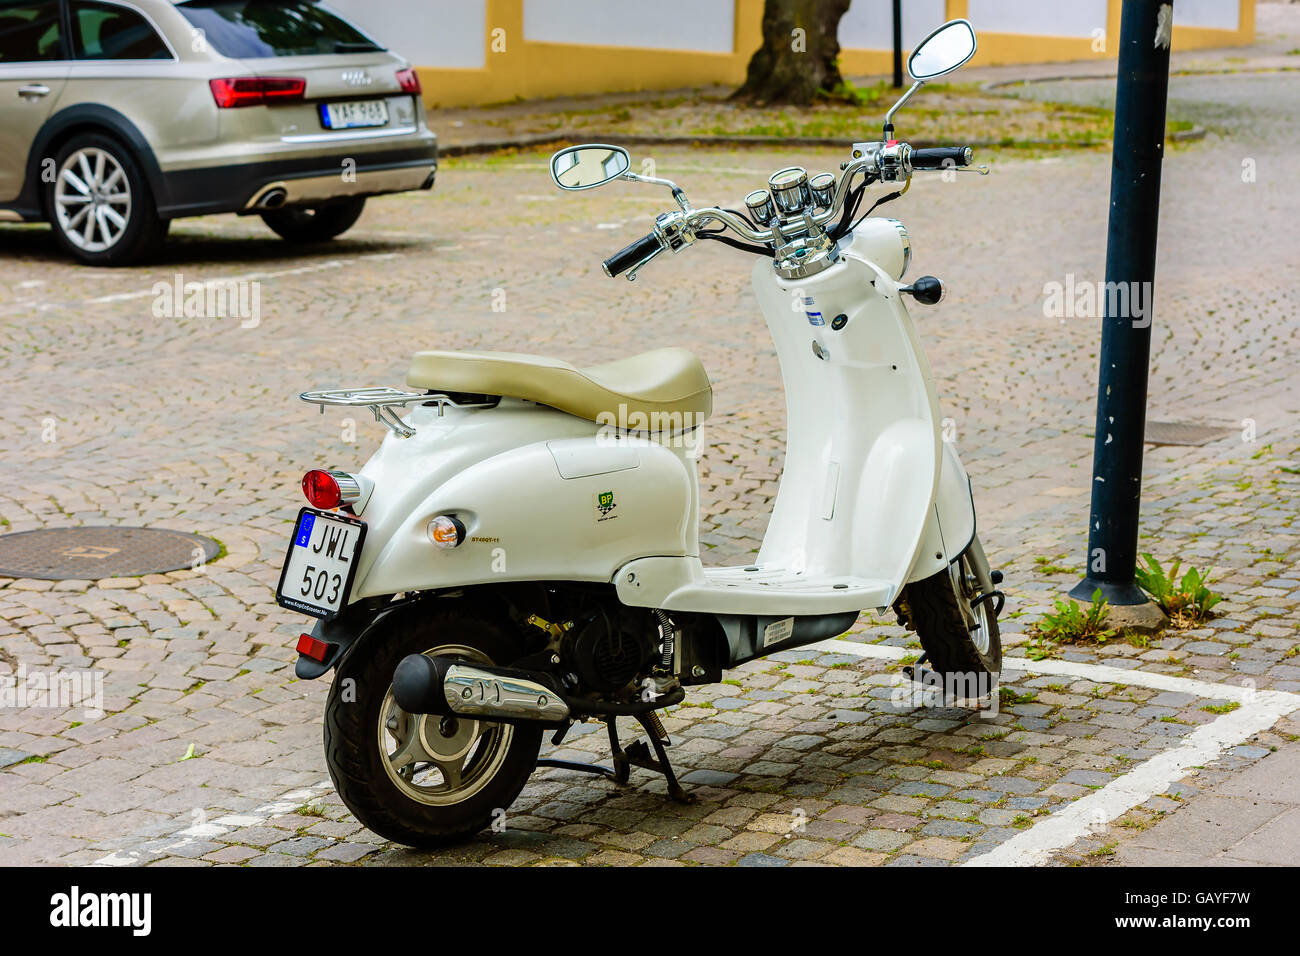 Motala, Sweden - June 21, 2016: Baotian retro 2013 moped parked in the street.. Stock Photo